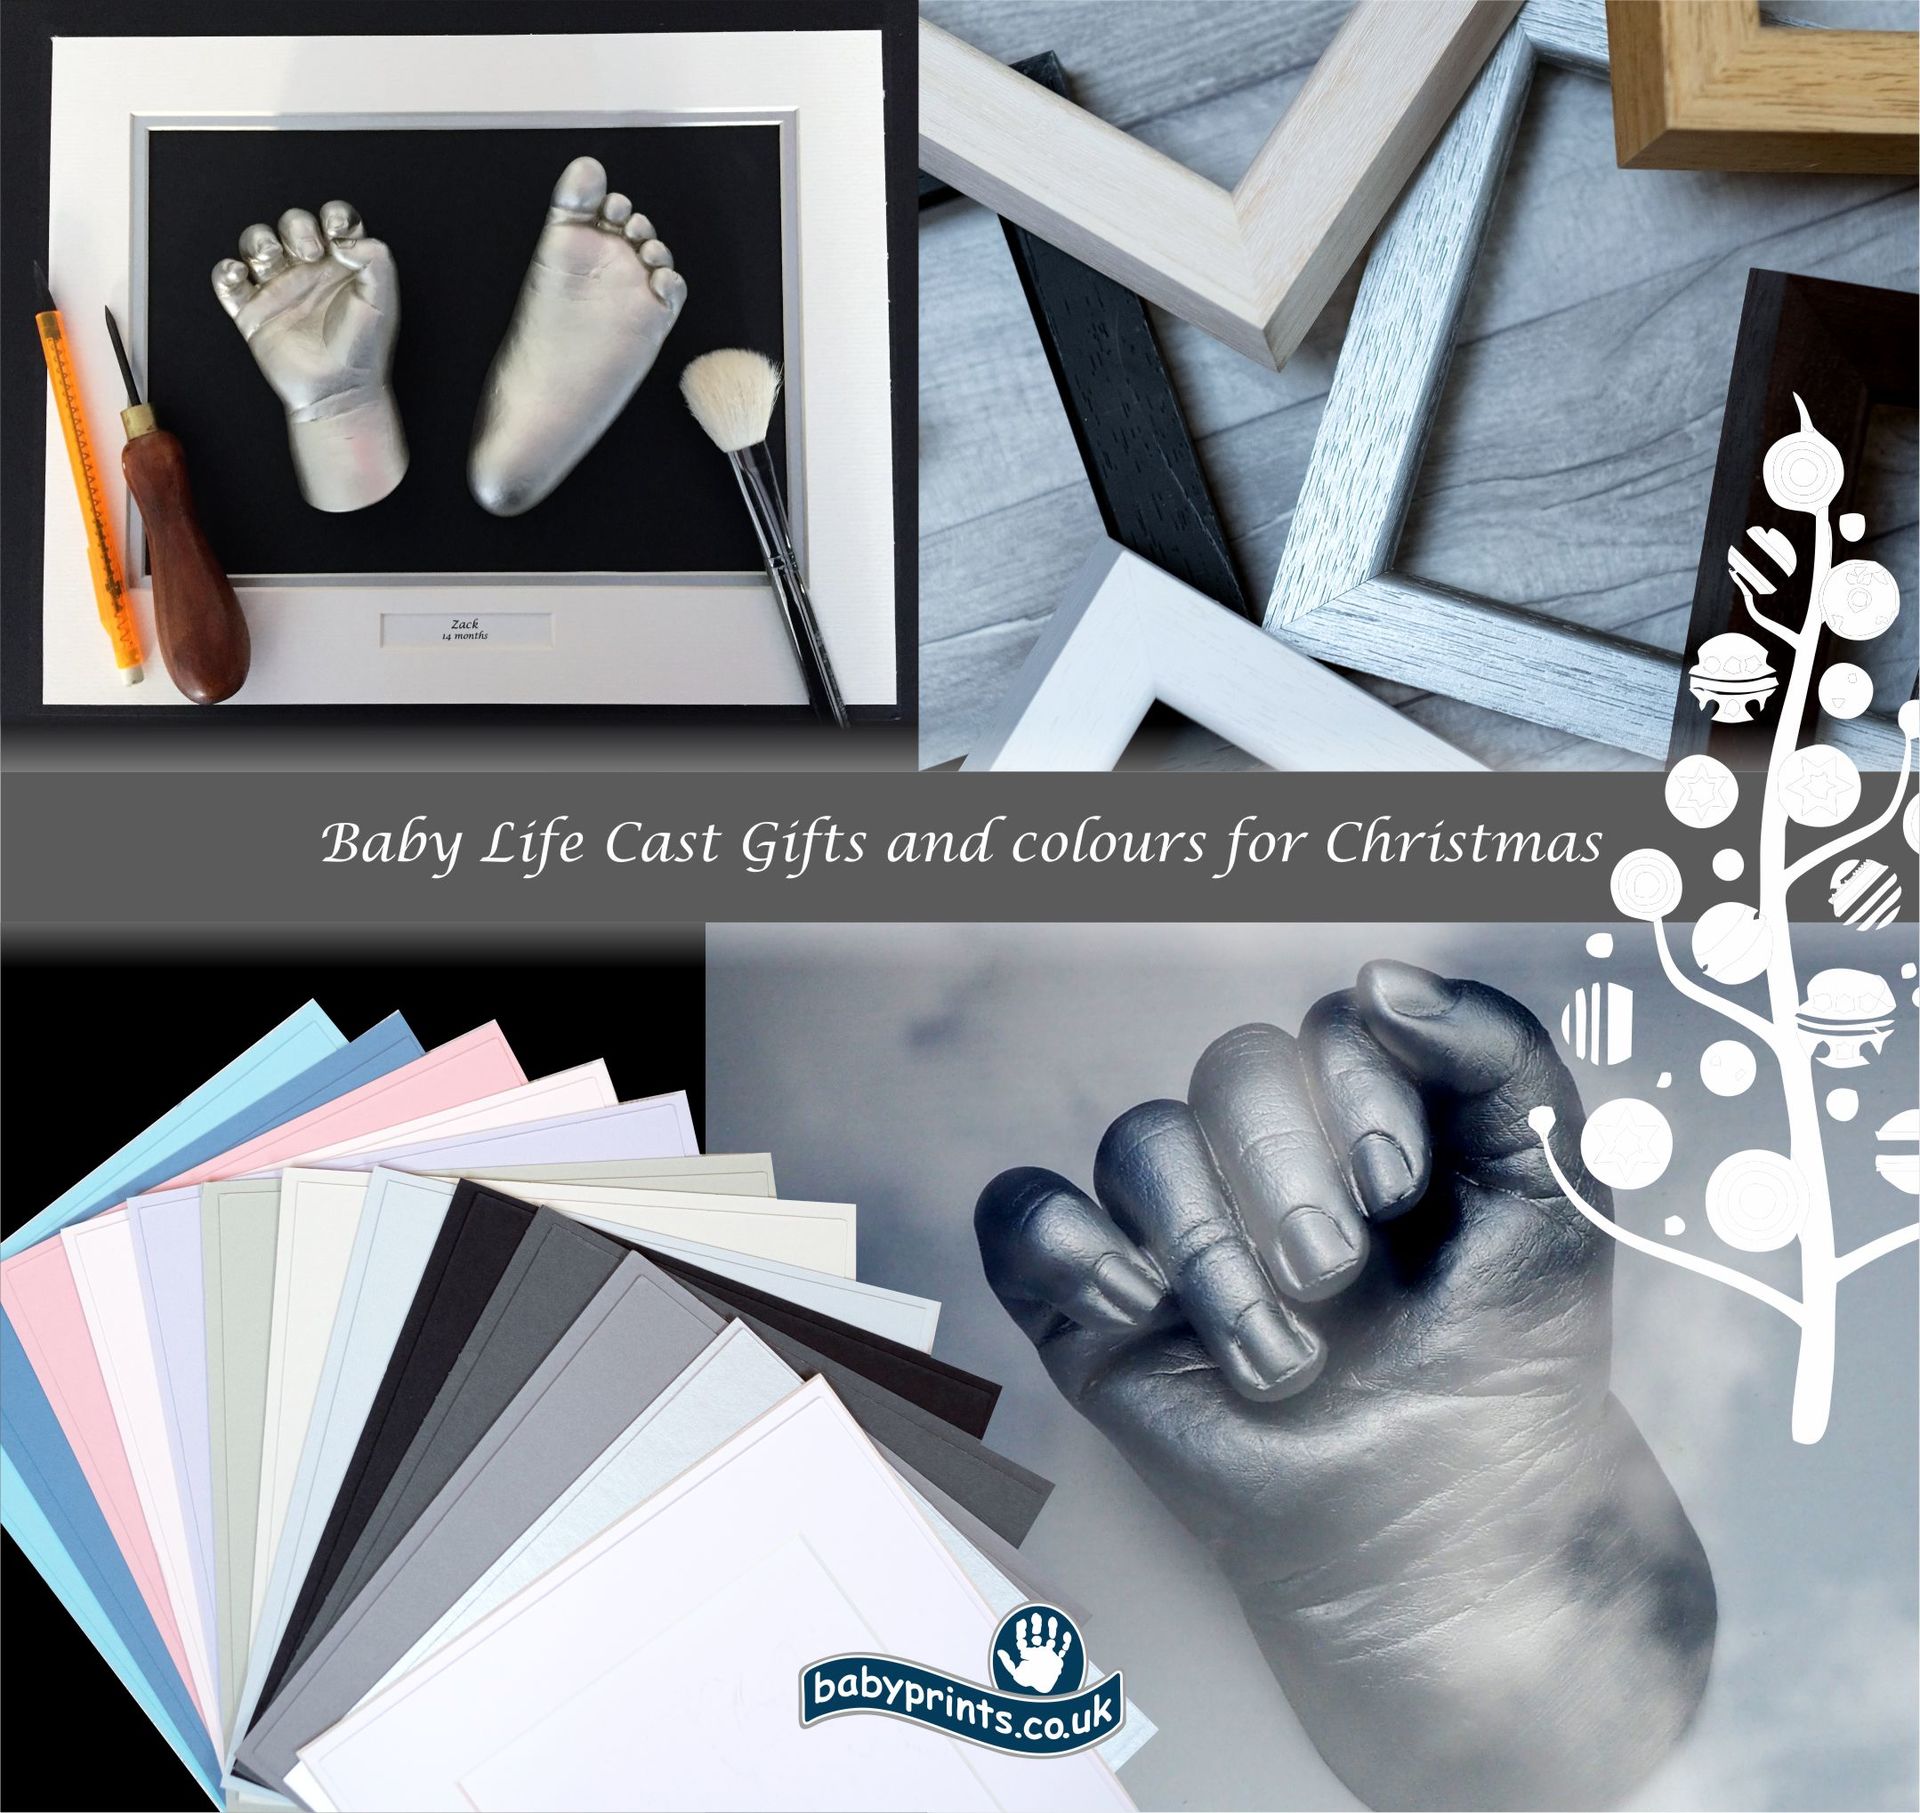 Christmas time out at Babyprints